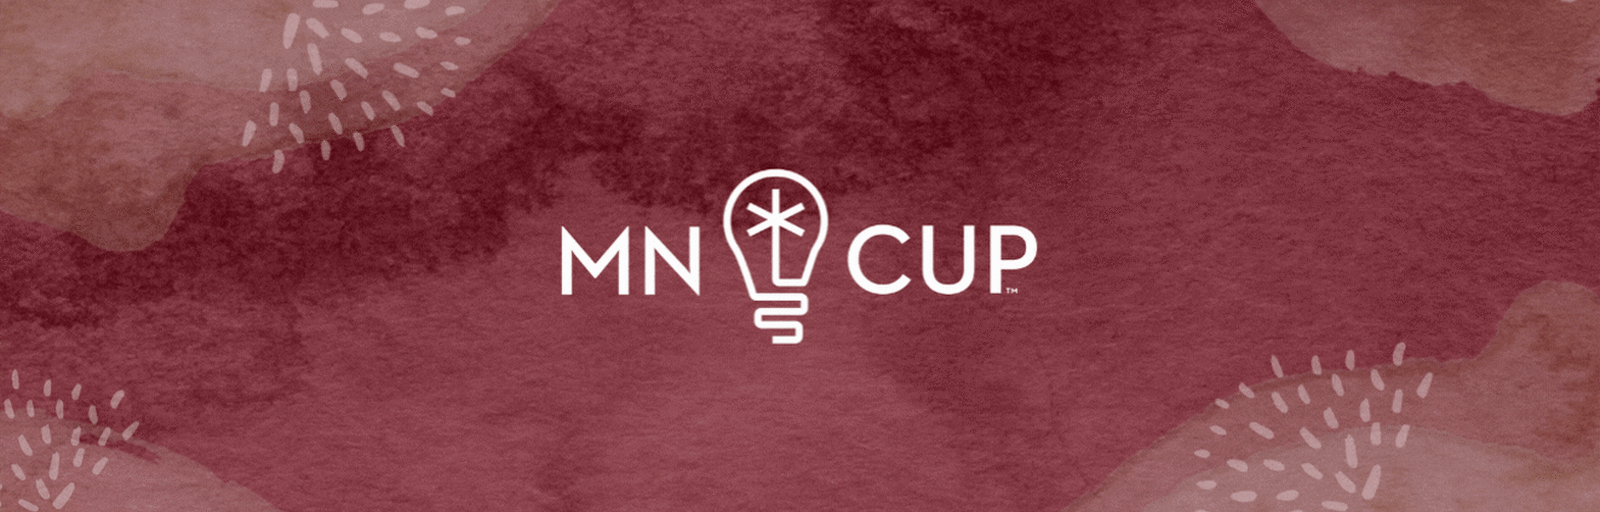 MN CUP Gif 2022